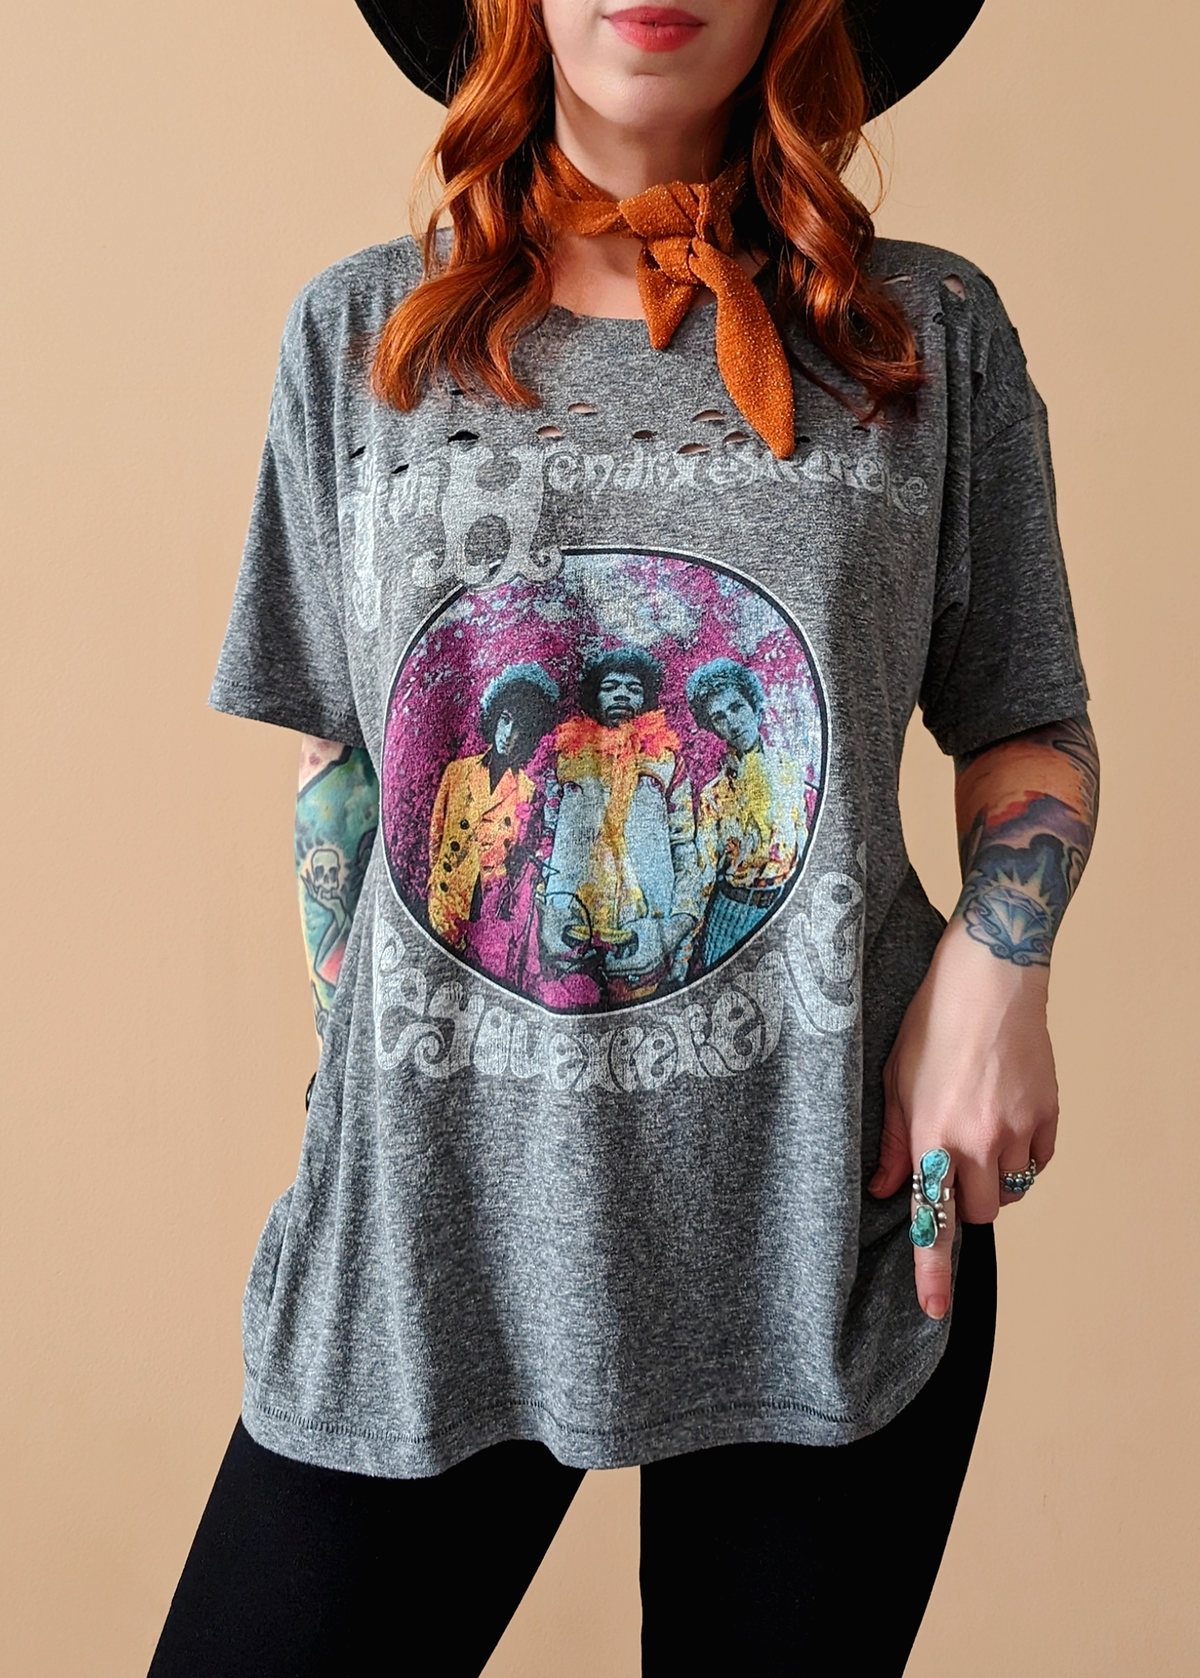 60s inspired Jimi Hendrix Experience Are You Experienced slouchy fit grey tee by daydreamer la, officially licensed and made in california, destroyed details